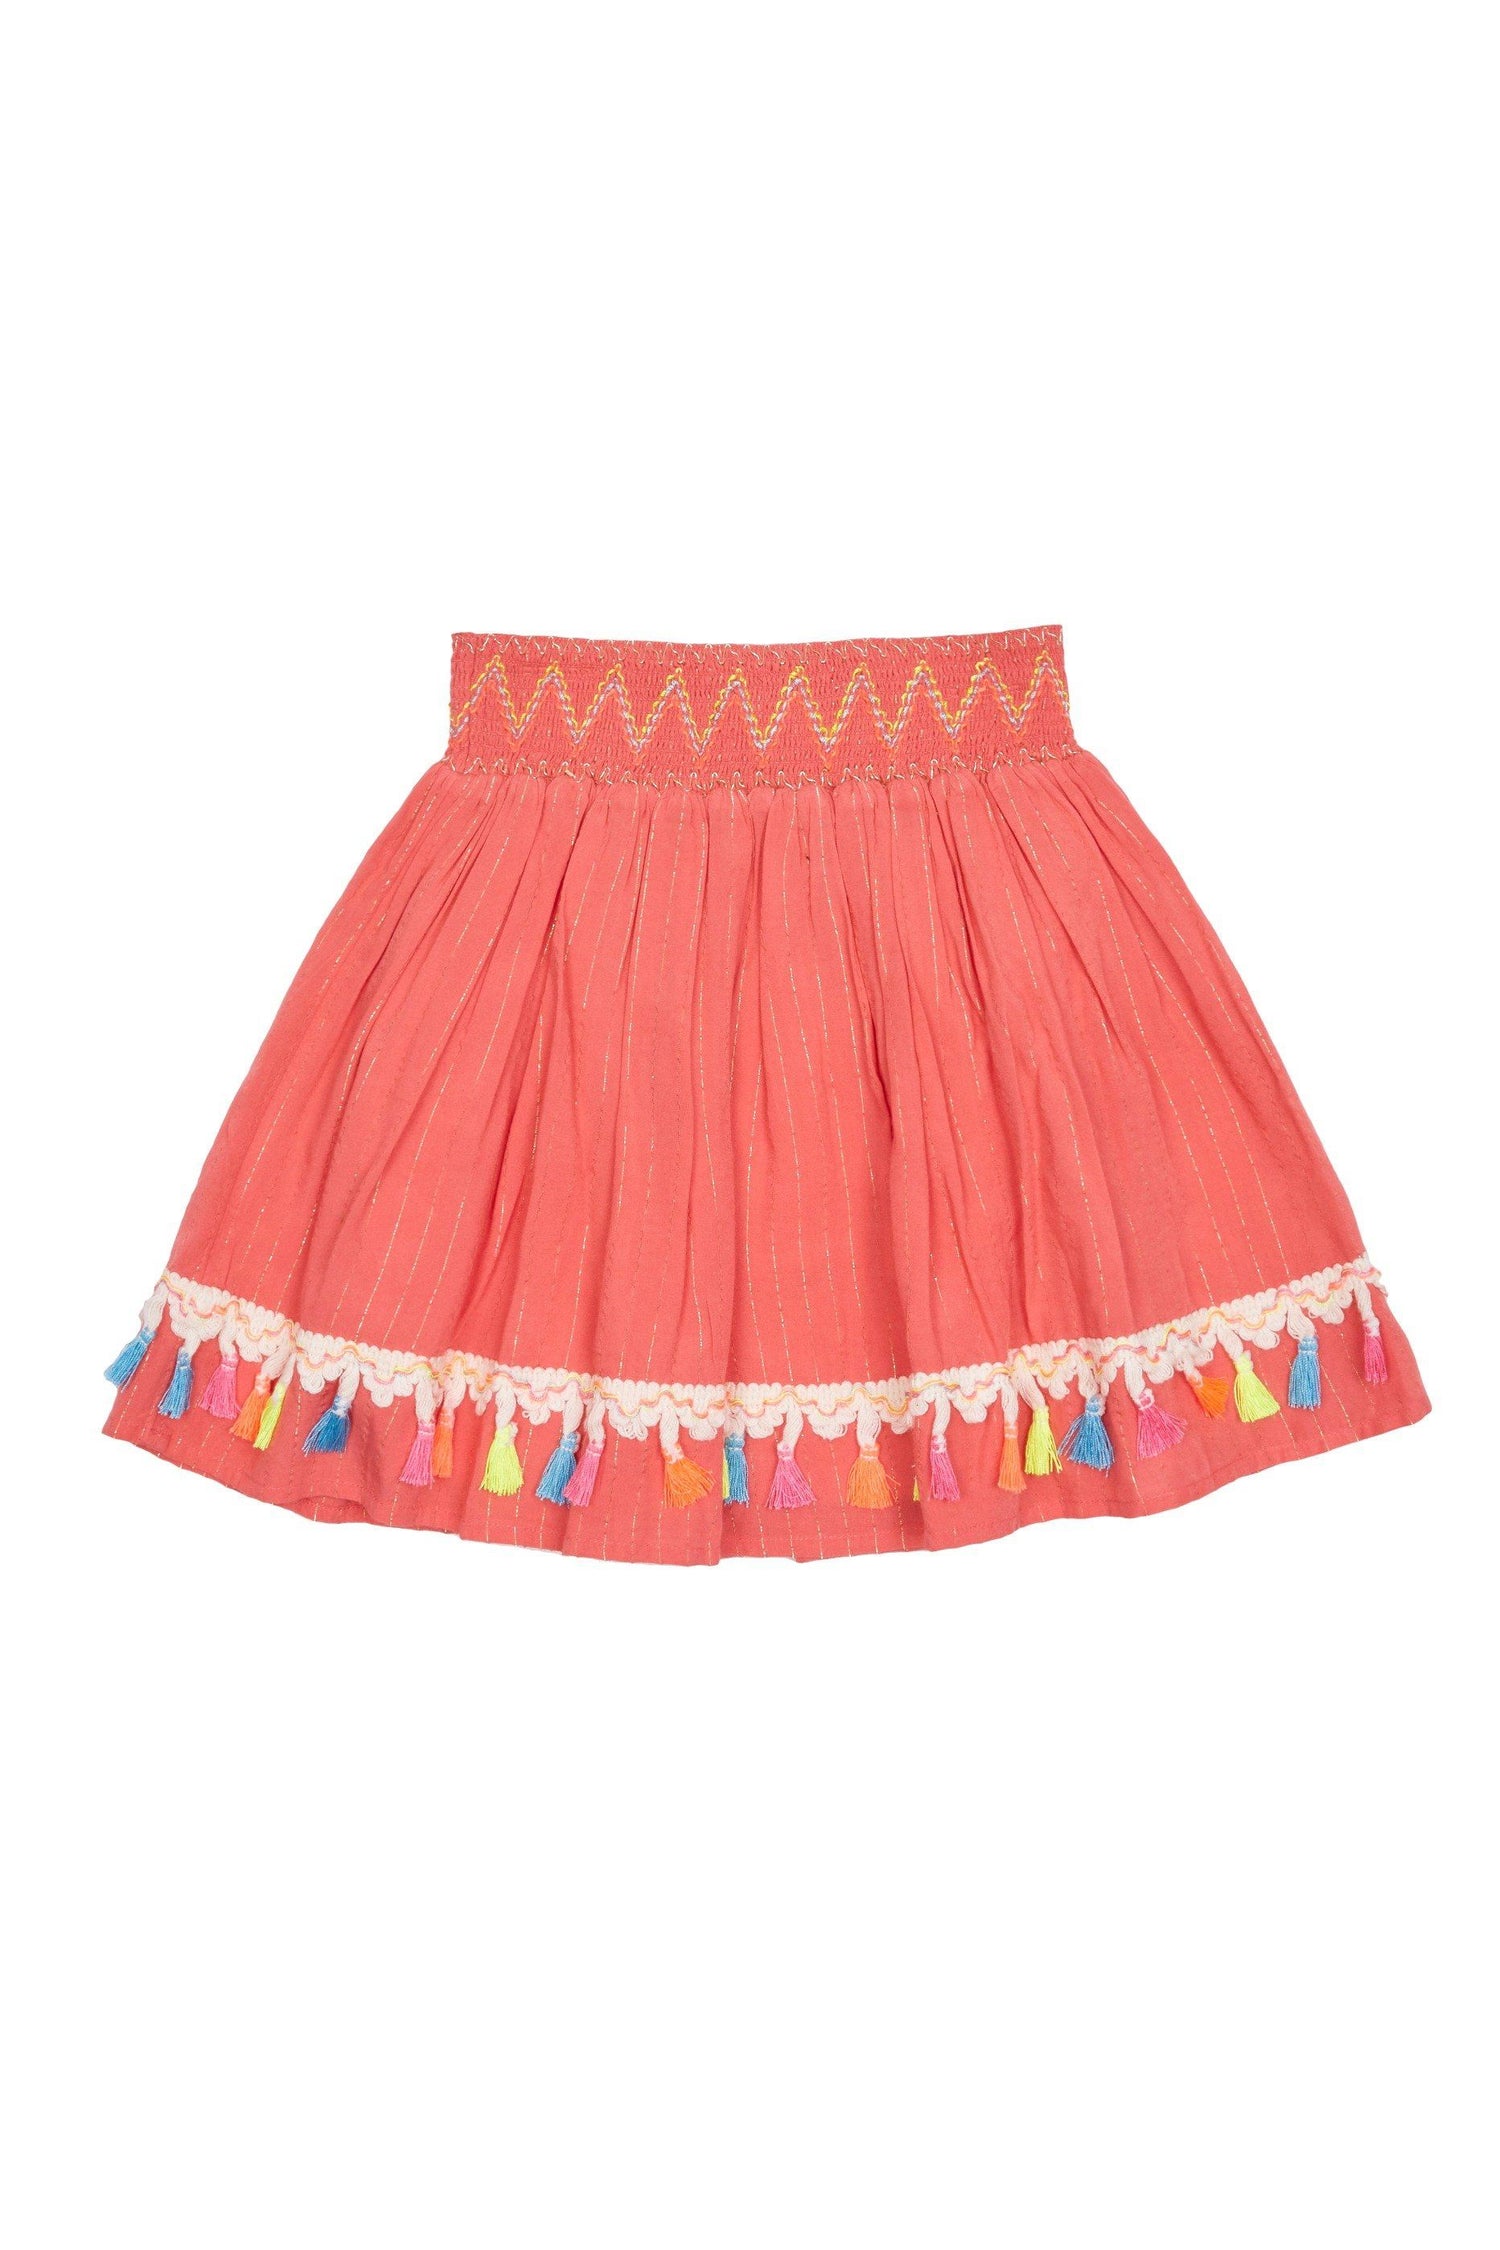 Back up of coral-colored skirt with metallic thread stripes, zig-zag stitching on waist, and embroidered fringe at hem. 